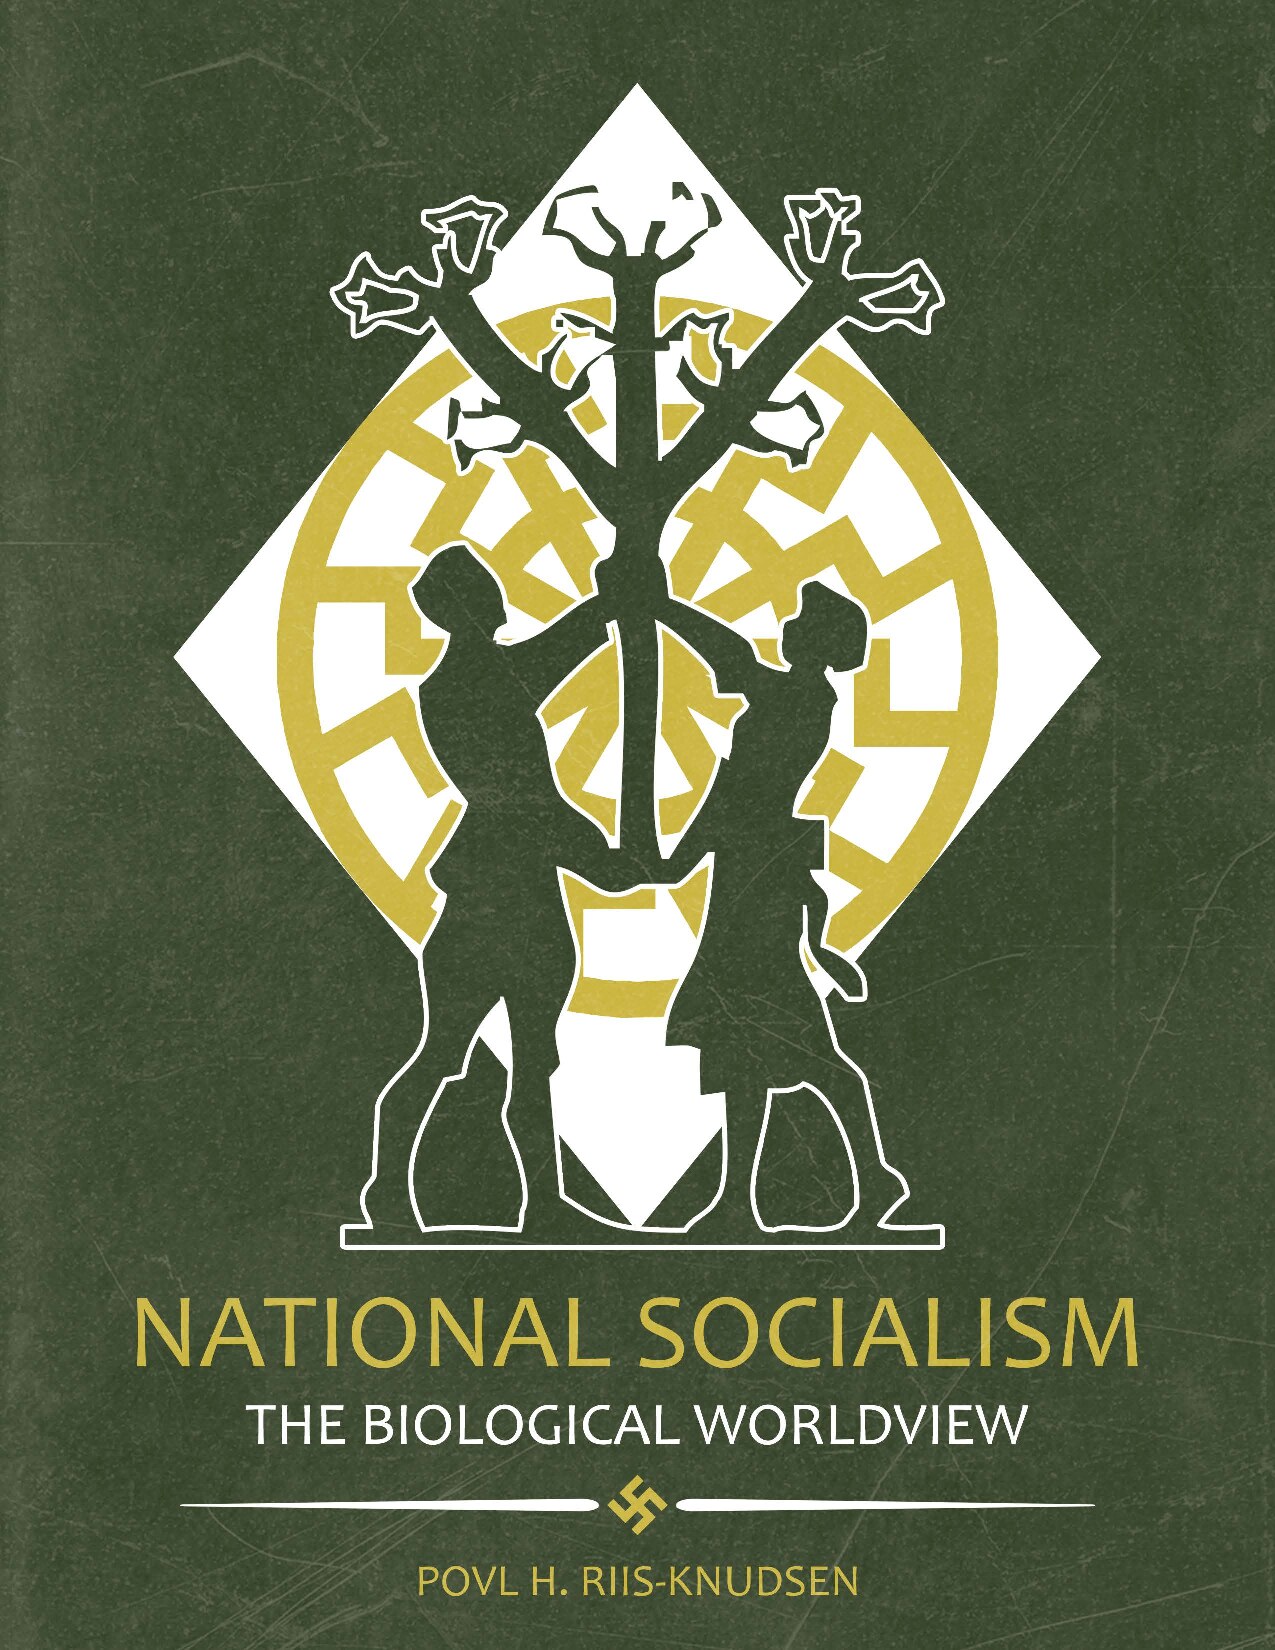 National Socialism The Biological Worldview